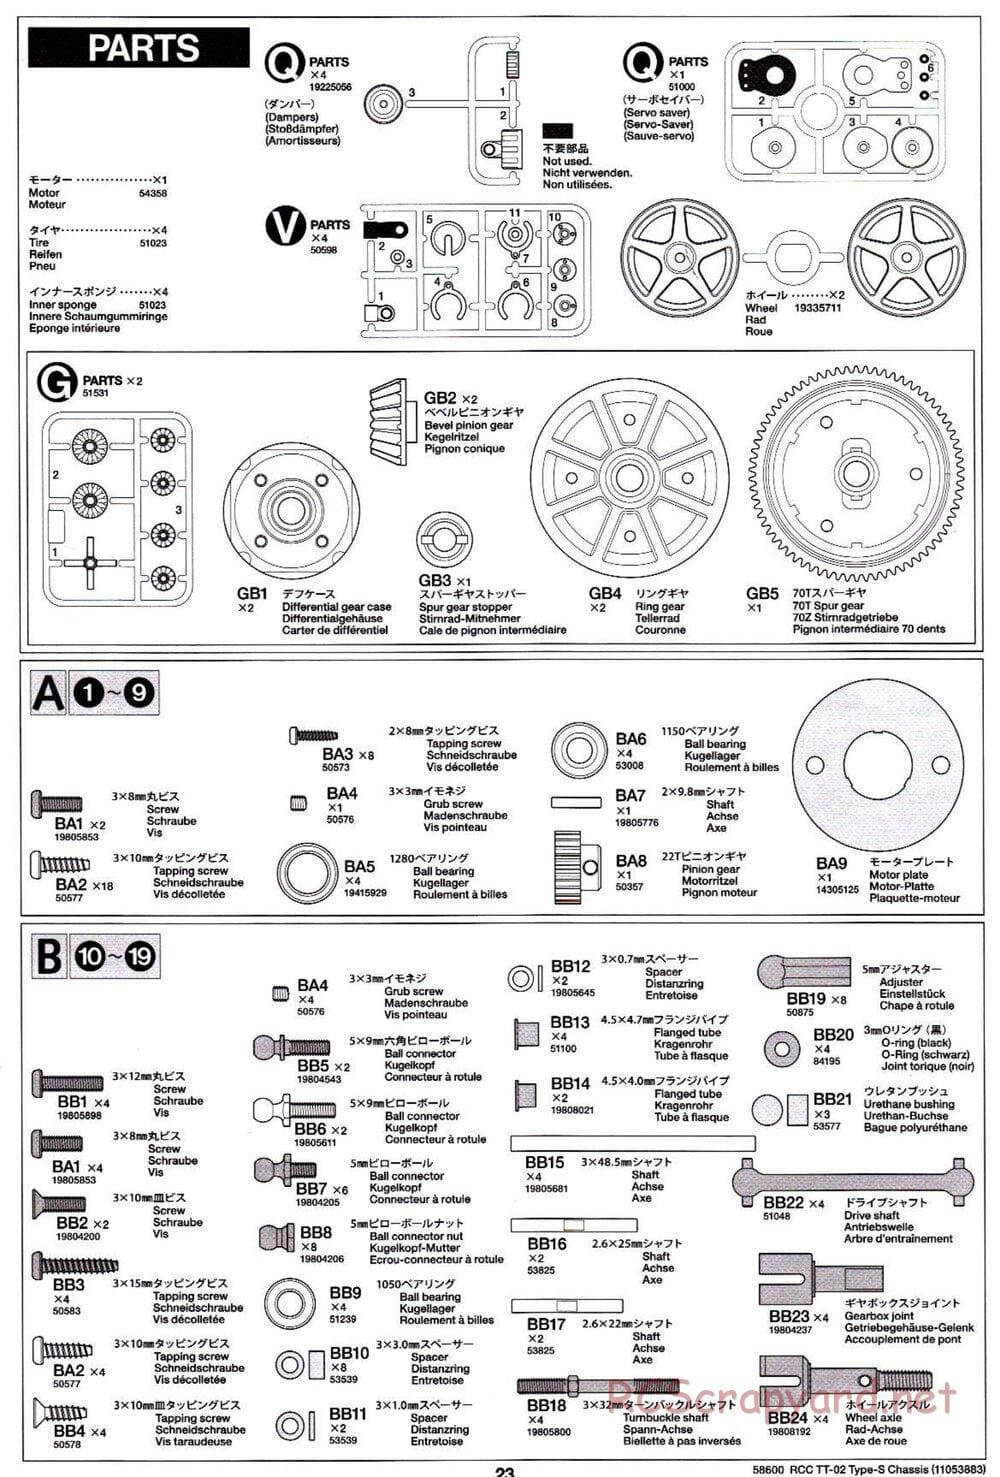 Tamiya - TT-02 Type-S Chassis - Manual - Page 23